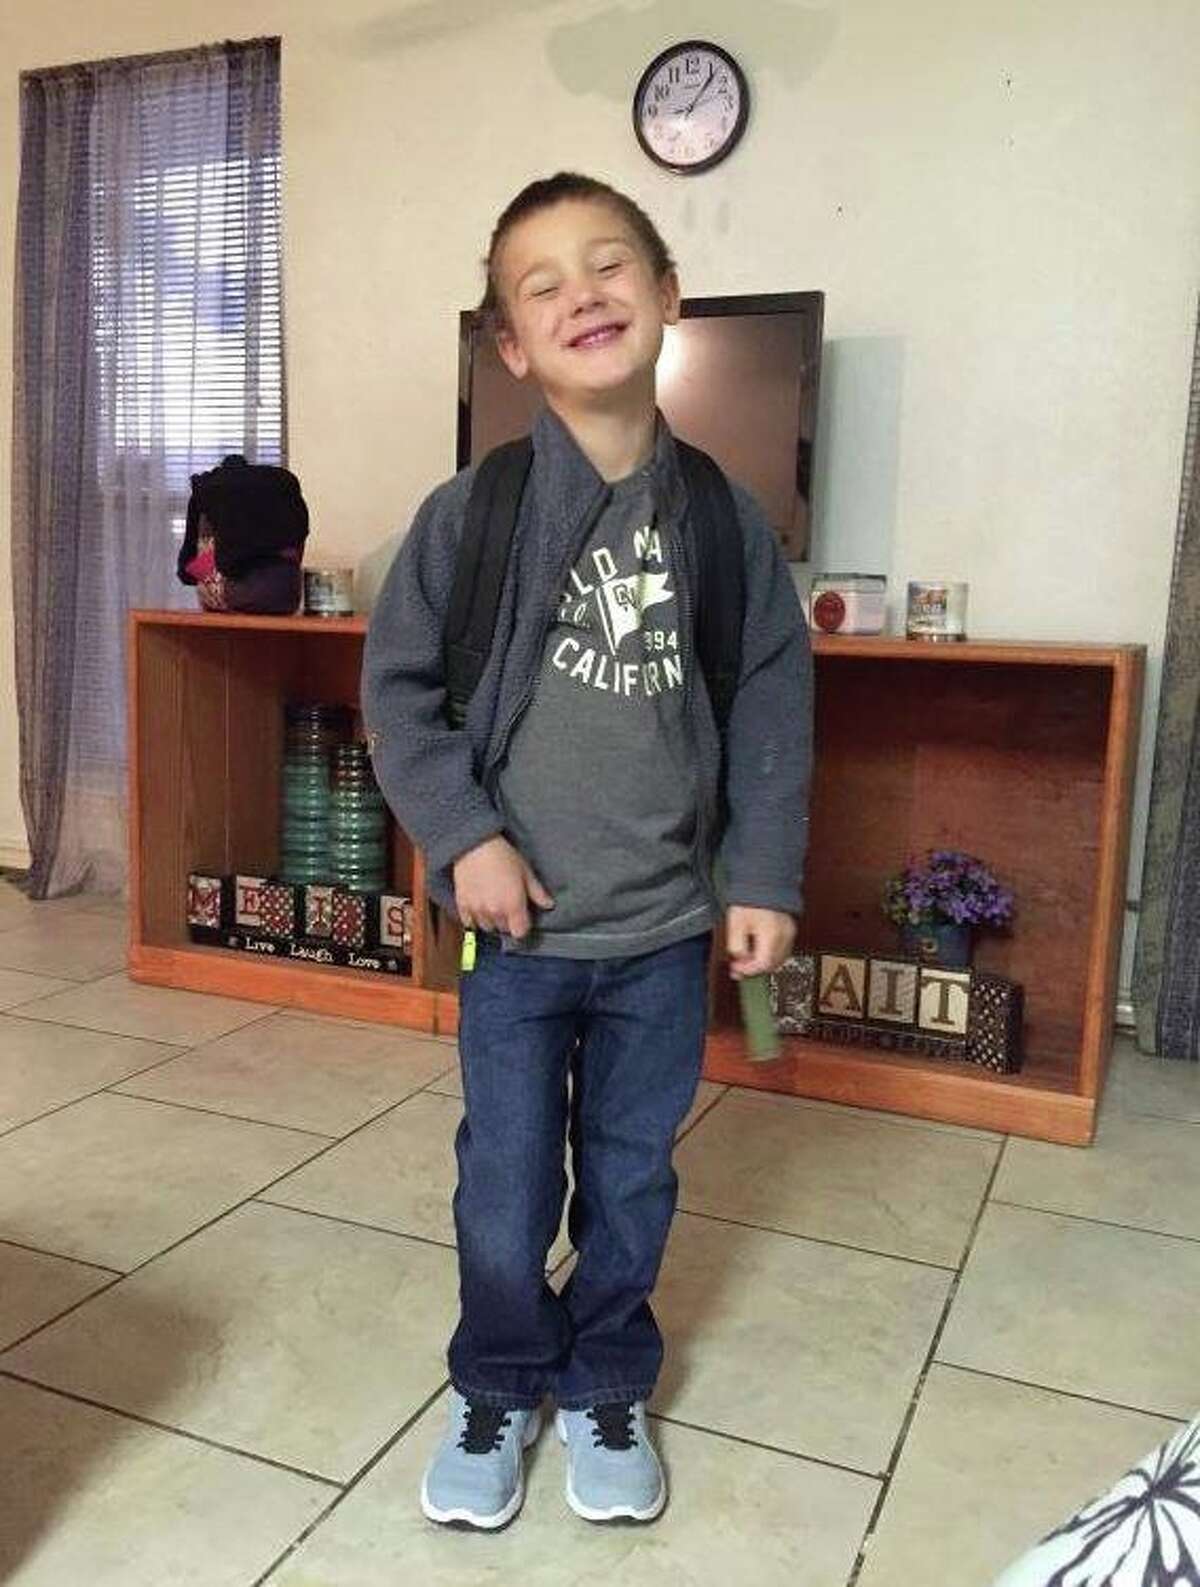 Tanner Smith would have turned 6 years old on Tuesday, but he was killed Sunday in a dog attack at a Vidor home. Faculty and students at Vidor Elementary, where Tanner was a kindergartner, are mourning his death.